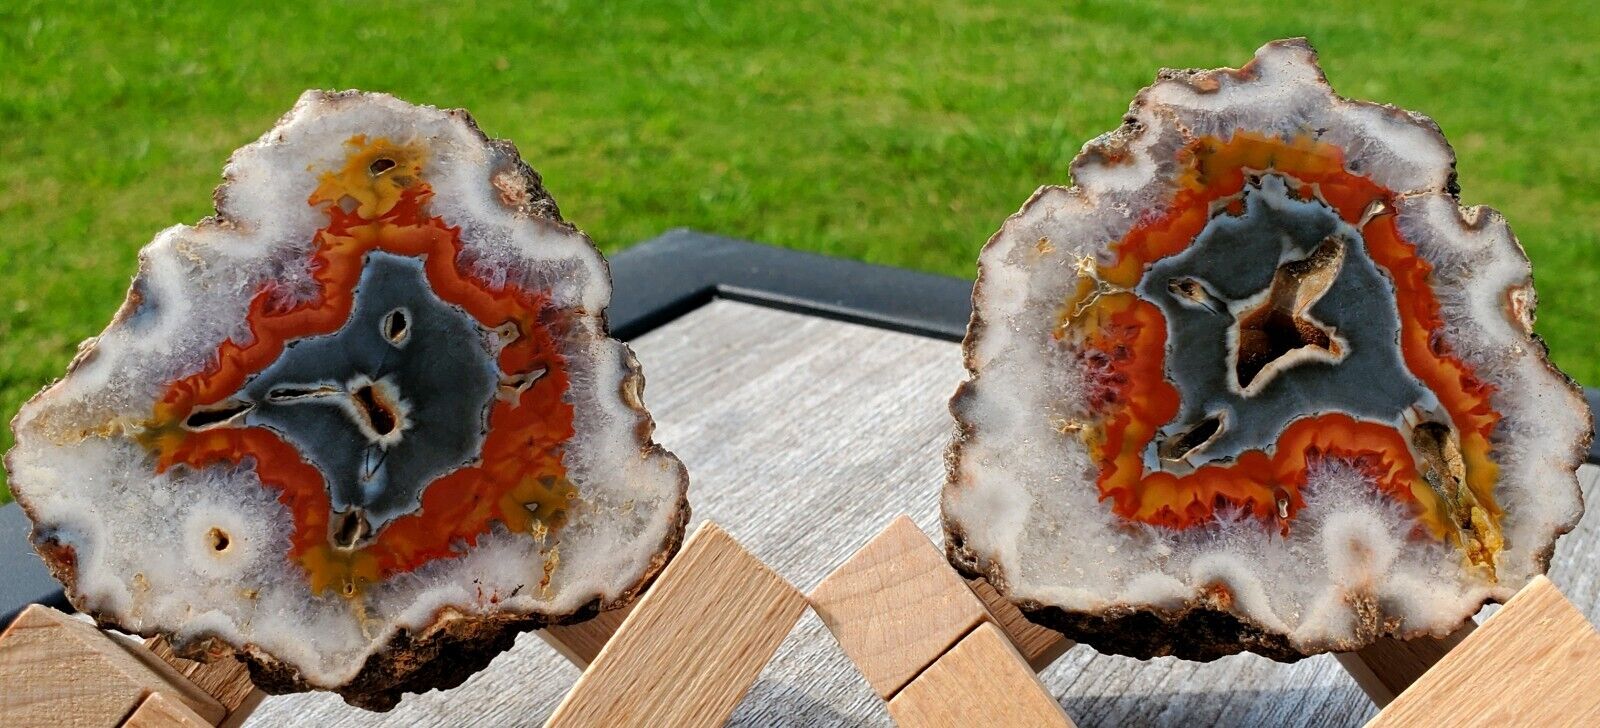 Hand Polished Agate Pair From Argentina, Beautiful Specimen Ready For Dispaly